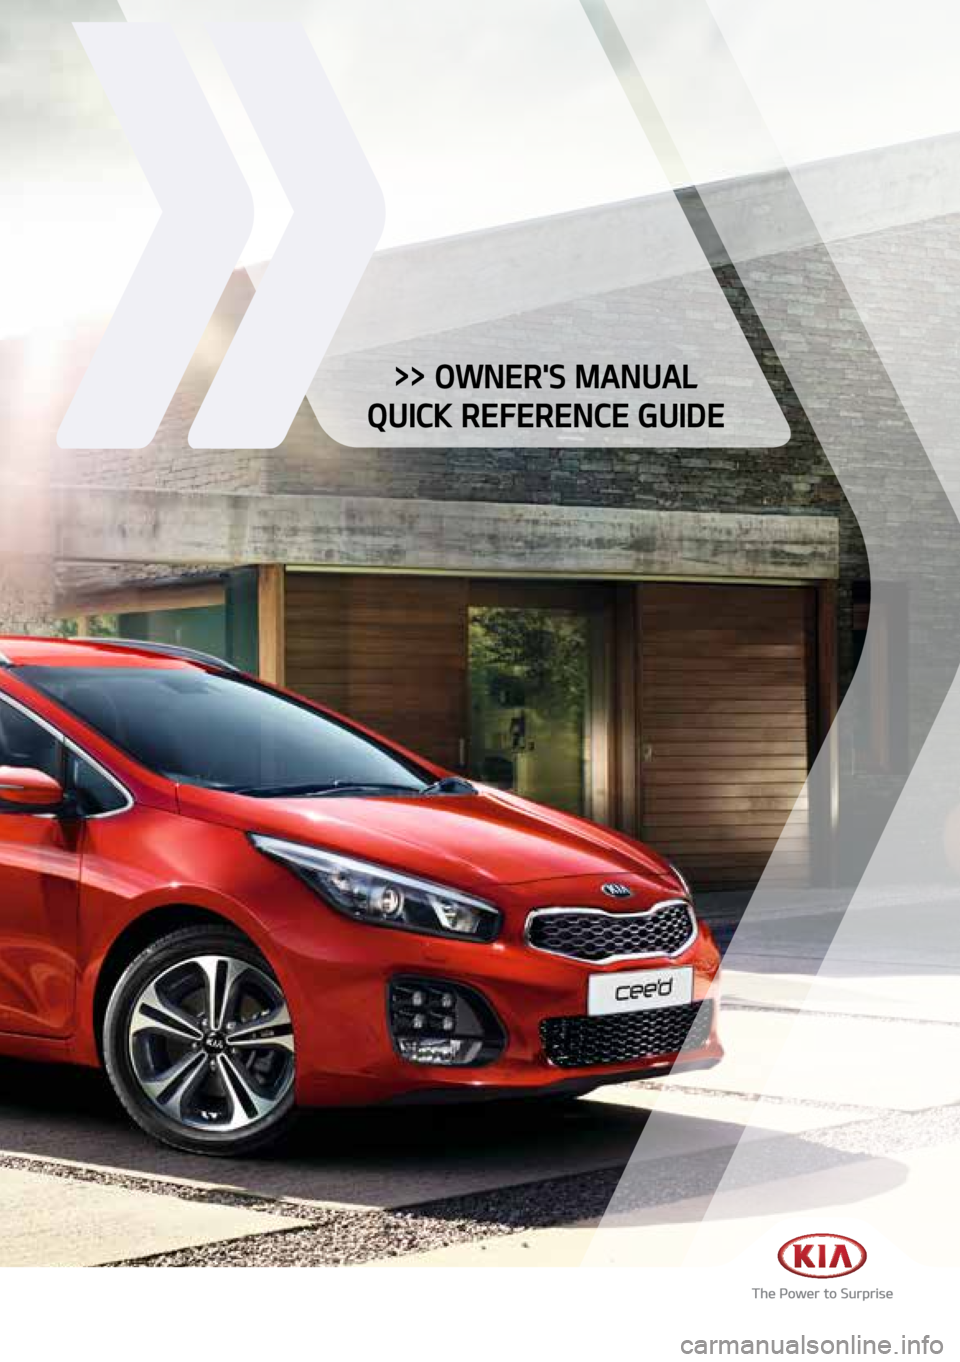 KIA CEED 2018  Owners Manual >> OWNER'S MANUAL
QUICK REFERENCE GUIDE    